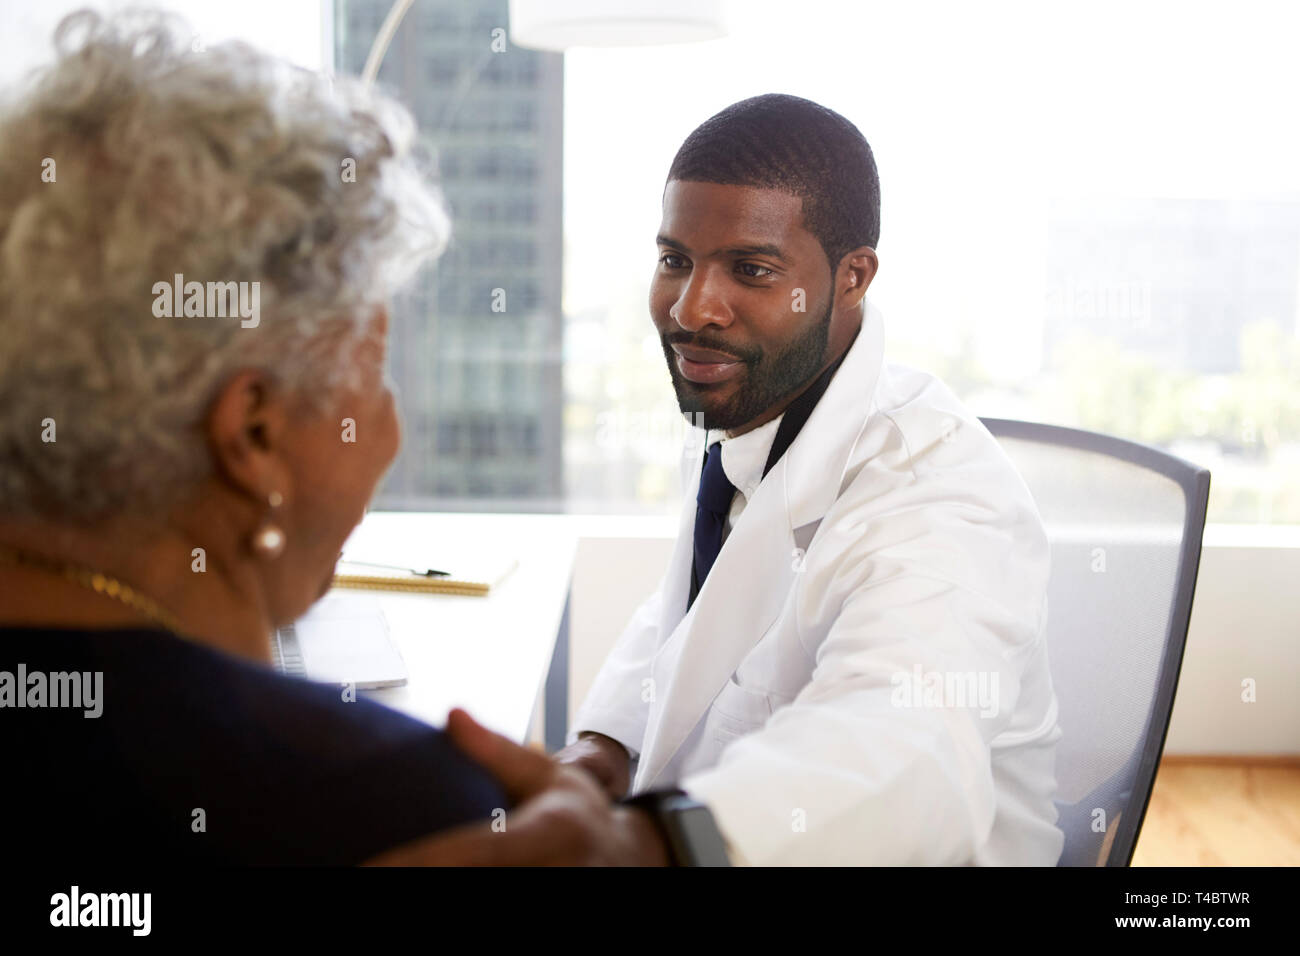 Senior Woman Meeting With Male Doctor Cosmetic Surgeon In Office Stock Photo